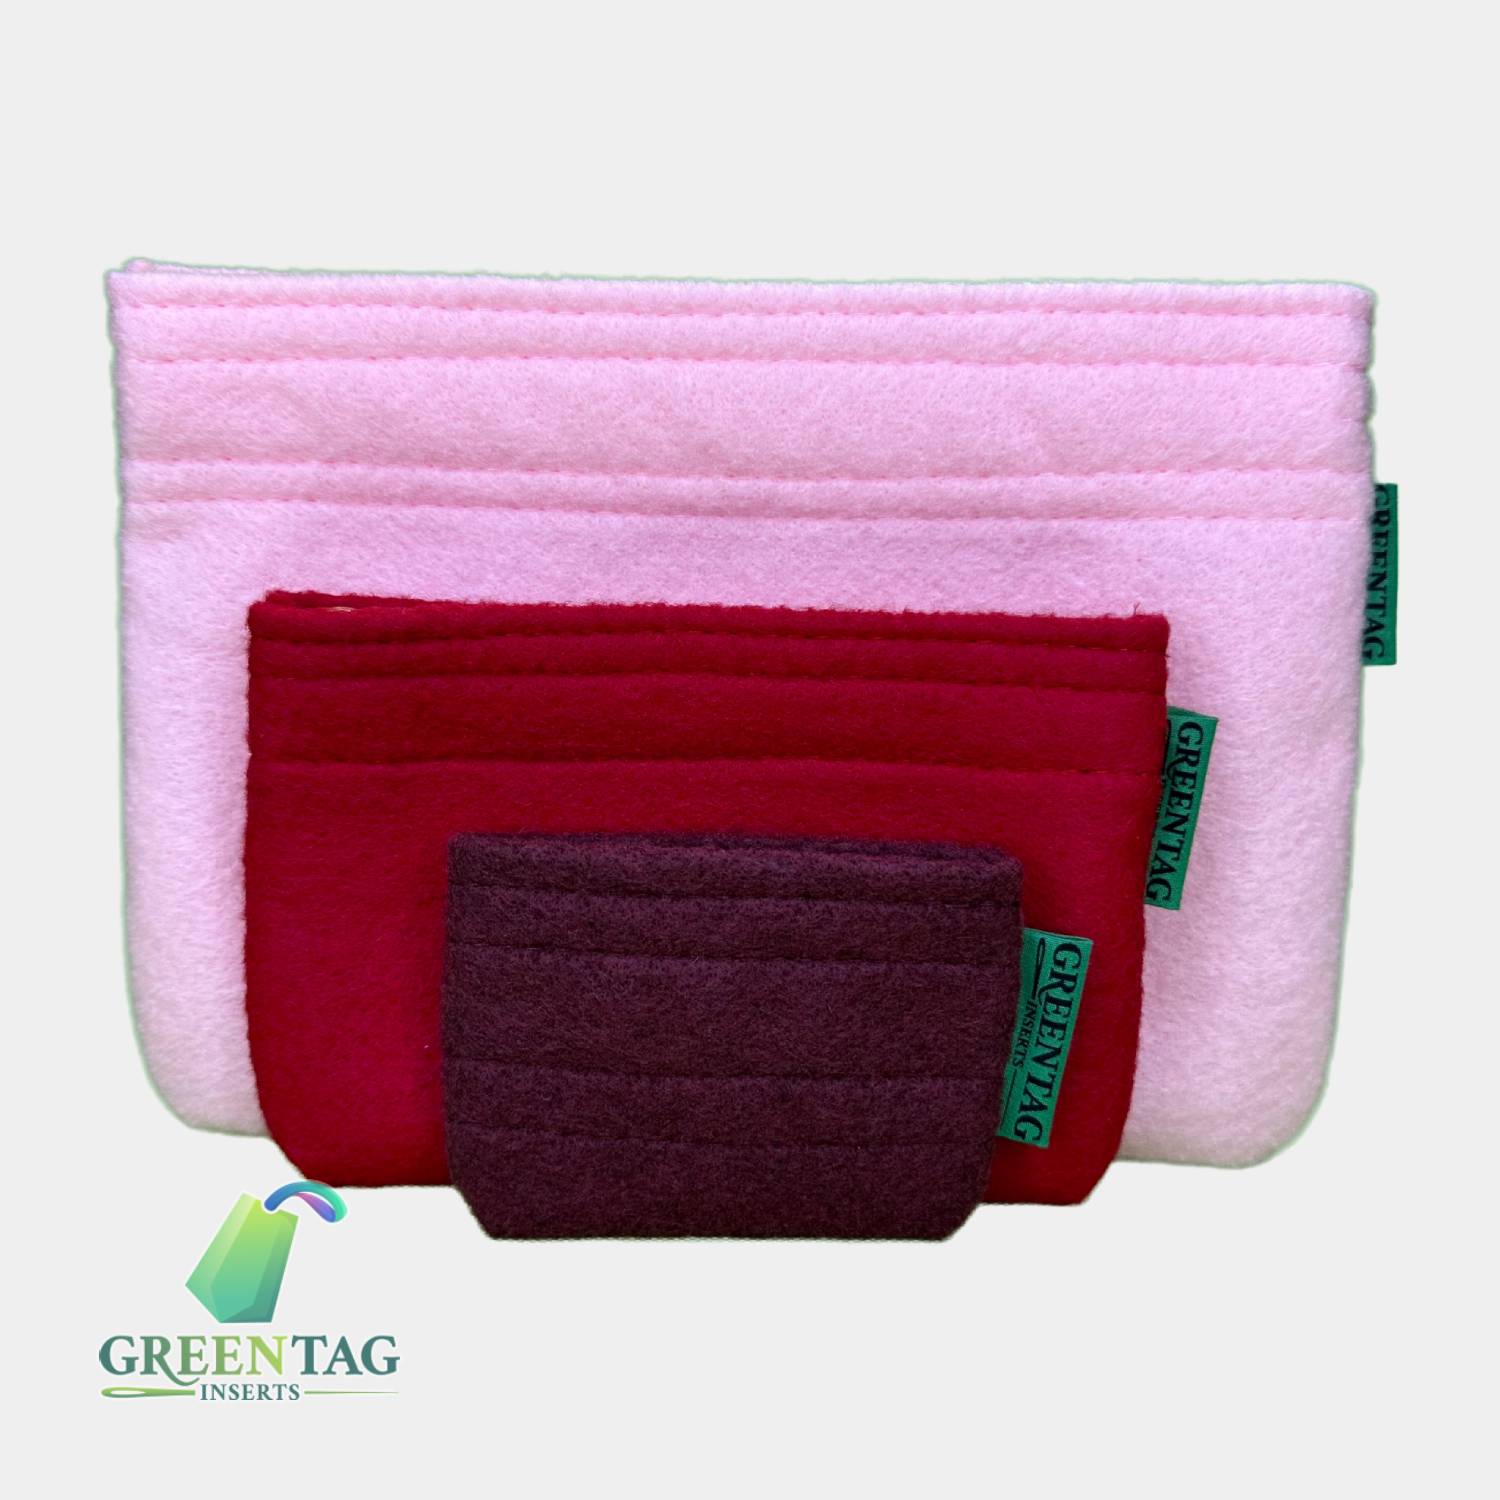 For [KIRIGAMI POCHETTE Spring Collection] (3-in-1 pouch) Felt